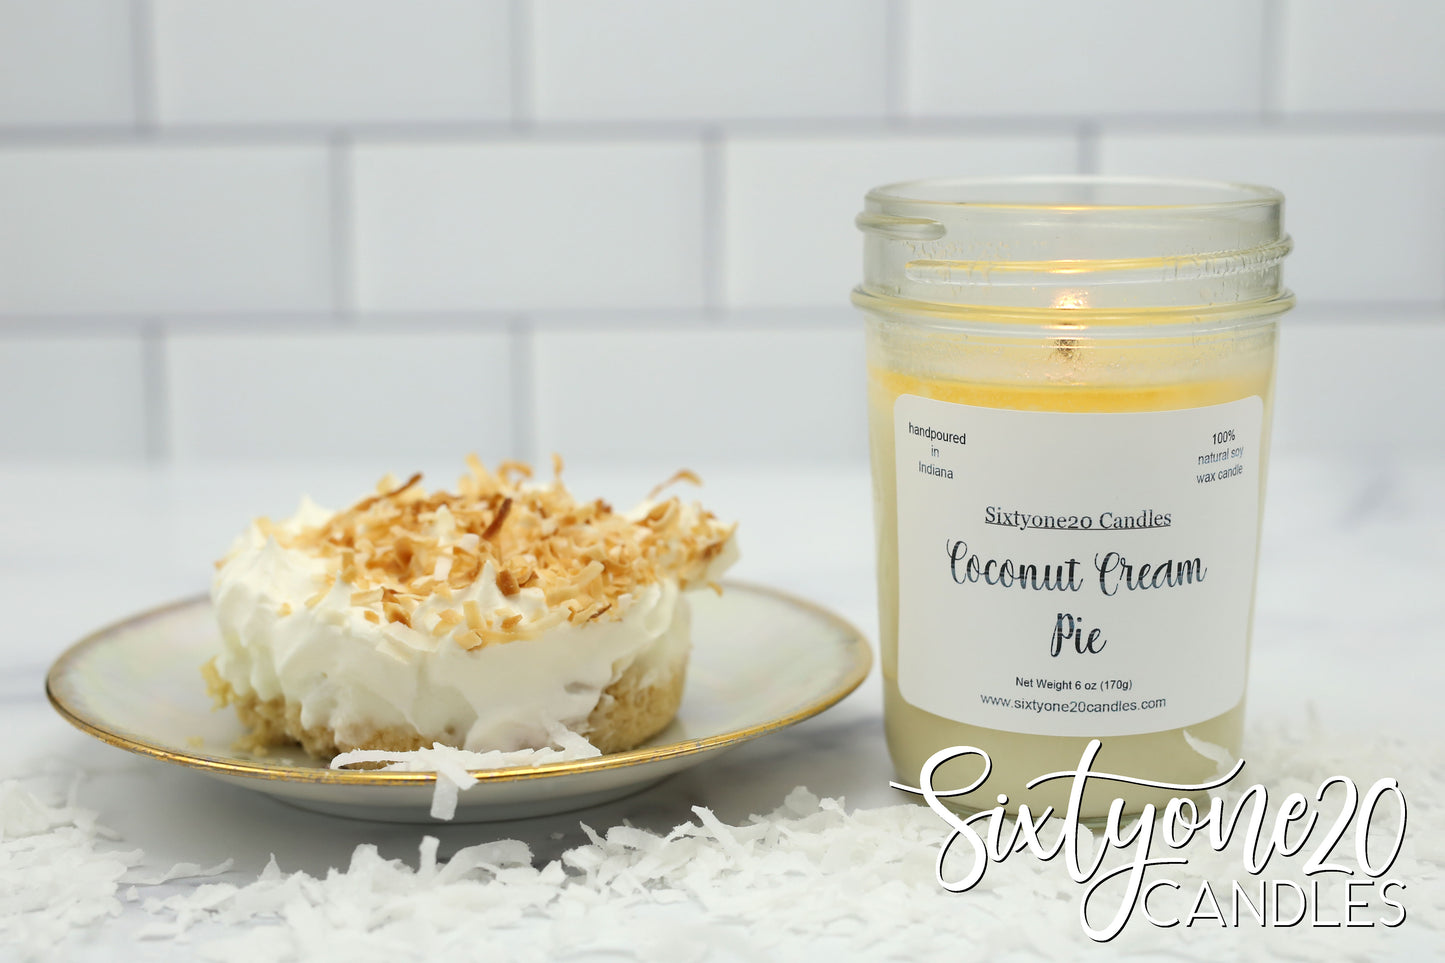 Coconut Cream Pie Soy wax candle net weight 6 ozCoconut Cream Pie 100% soy wax candle and pie